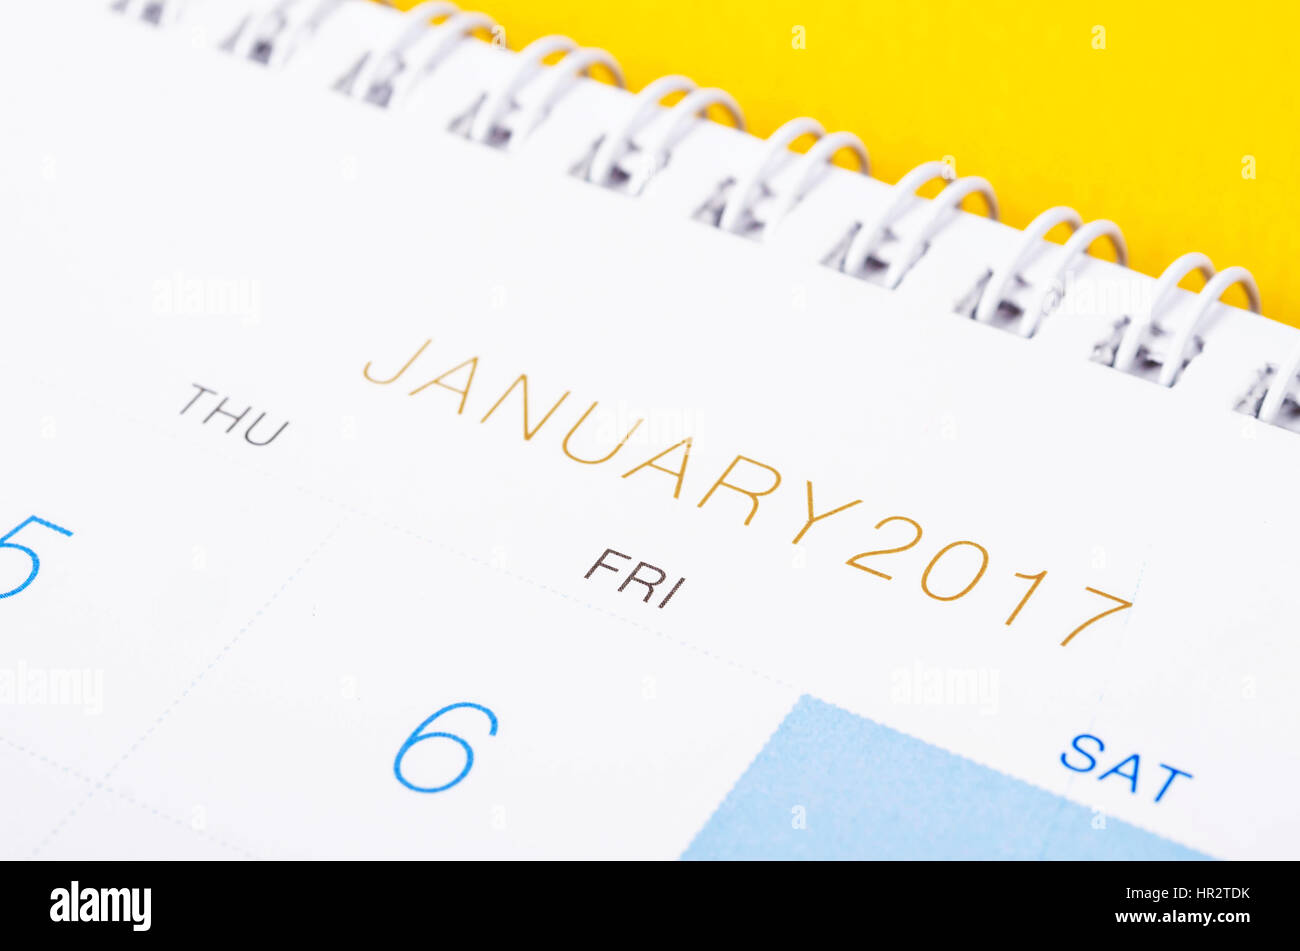 Desk top calendar January 2017 close up on yellow background. Stock Photo